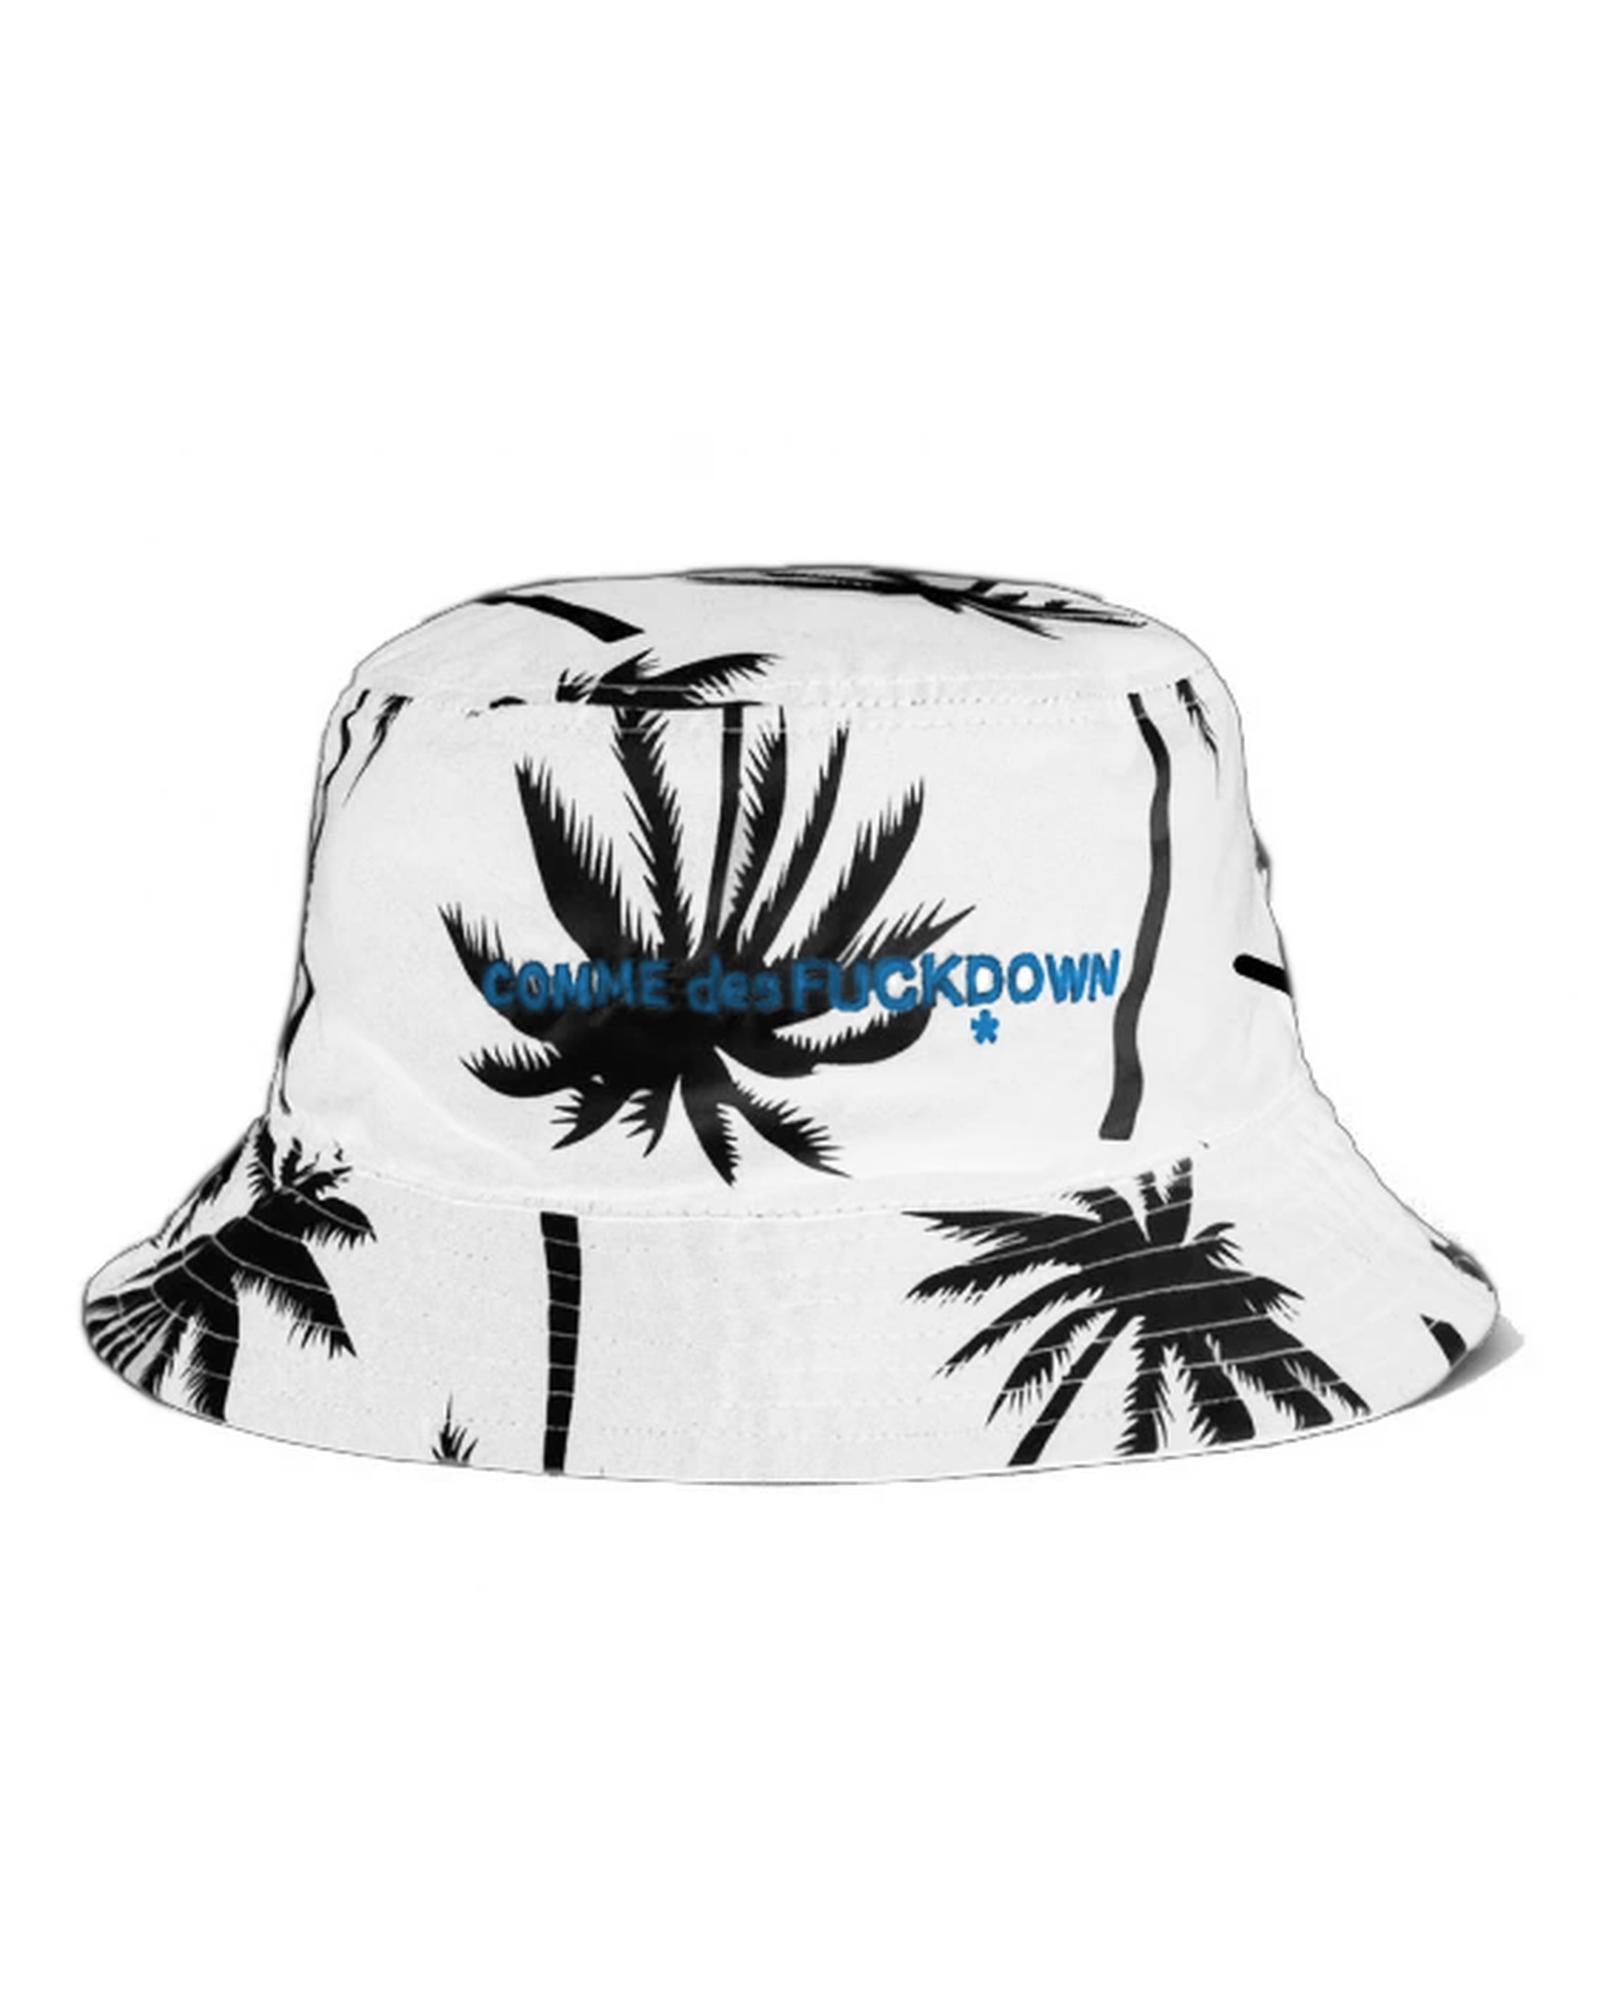 Comme des Fuckdown Fisherman Hat with Palm Print and Embroidered Logo One Size Women